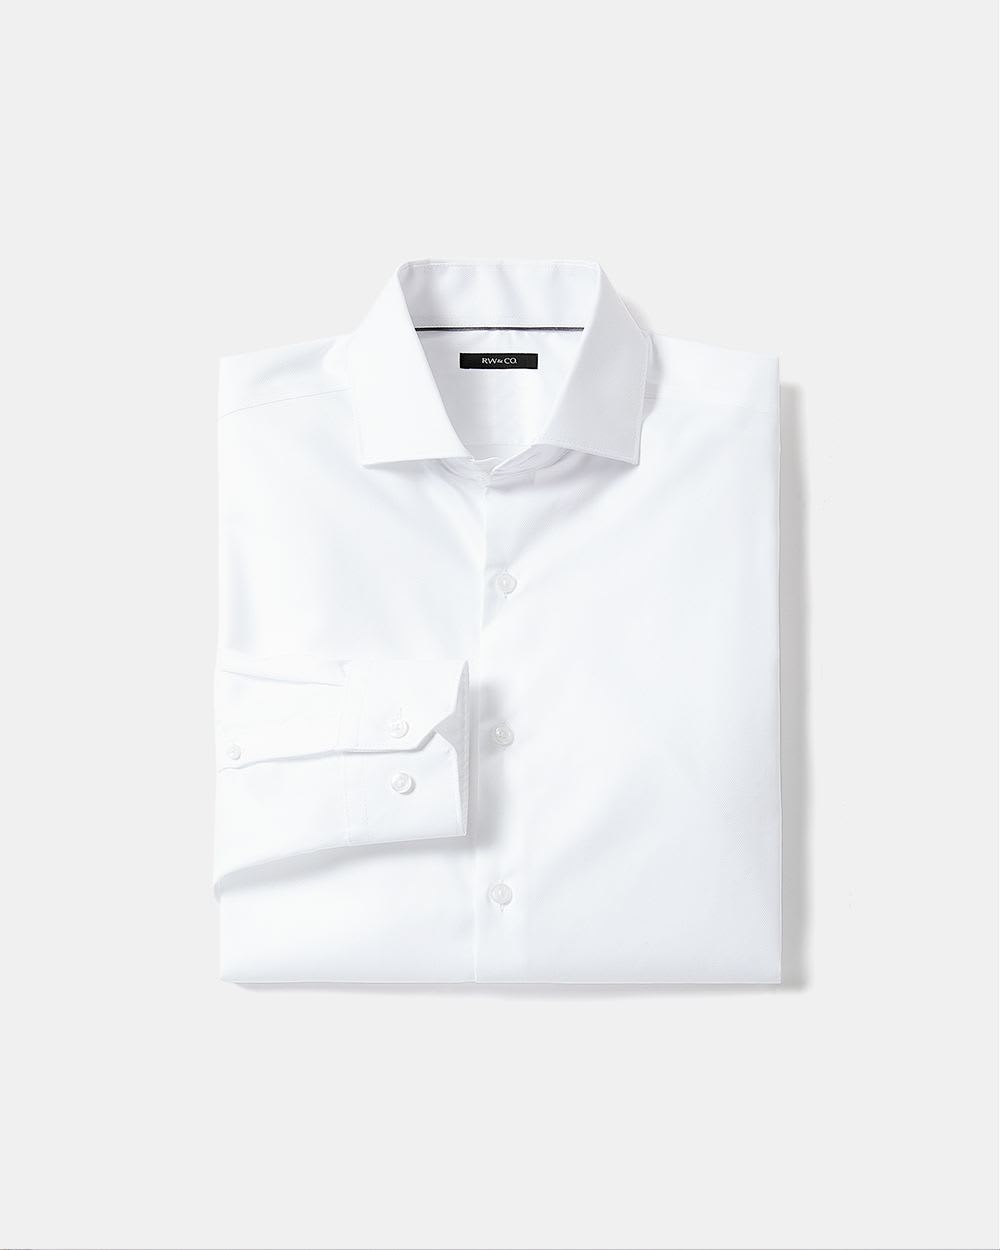 dress shirt with wide spread collar ...